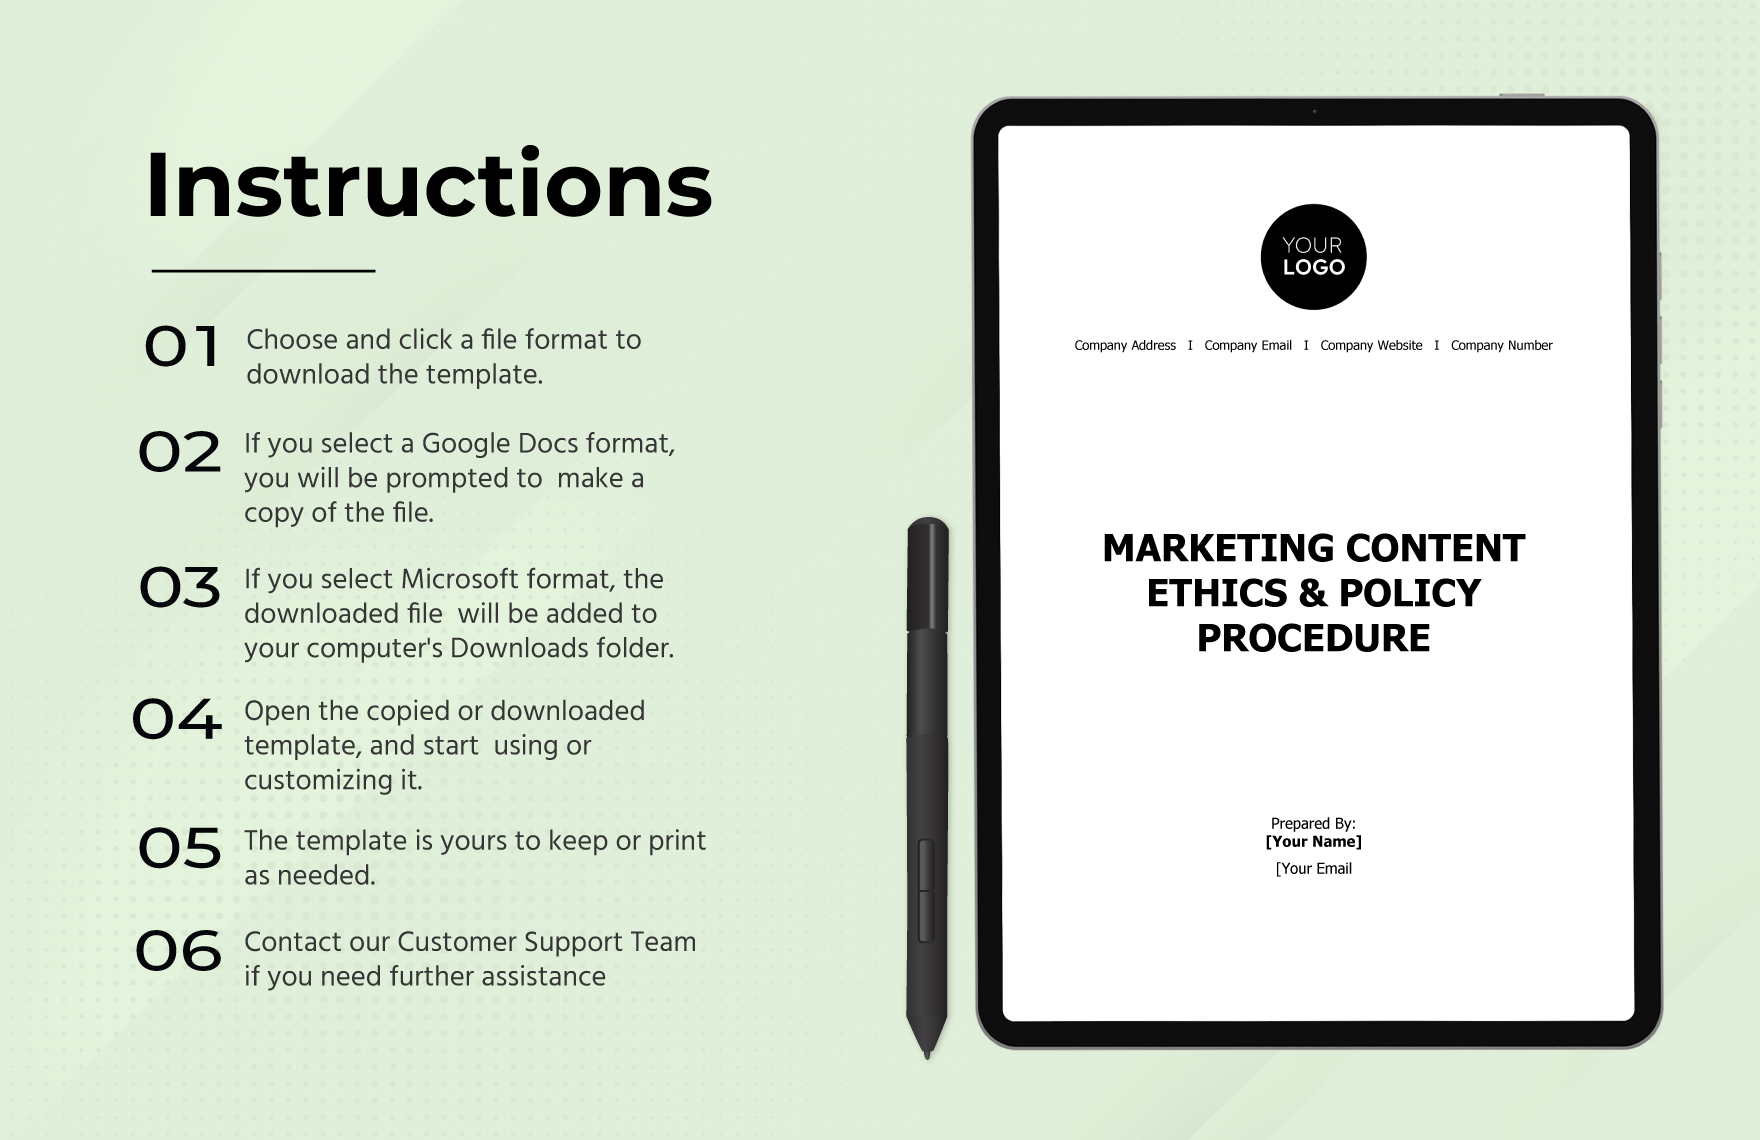 Marketing Content Ethics & Policy Procedure Template